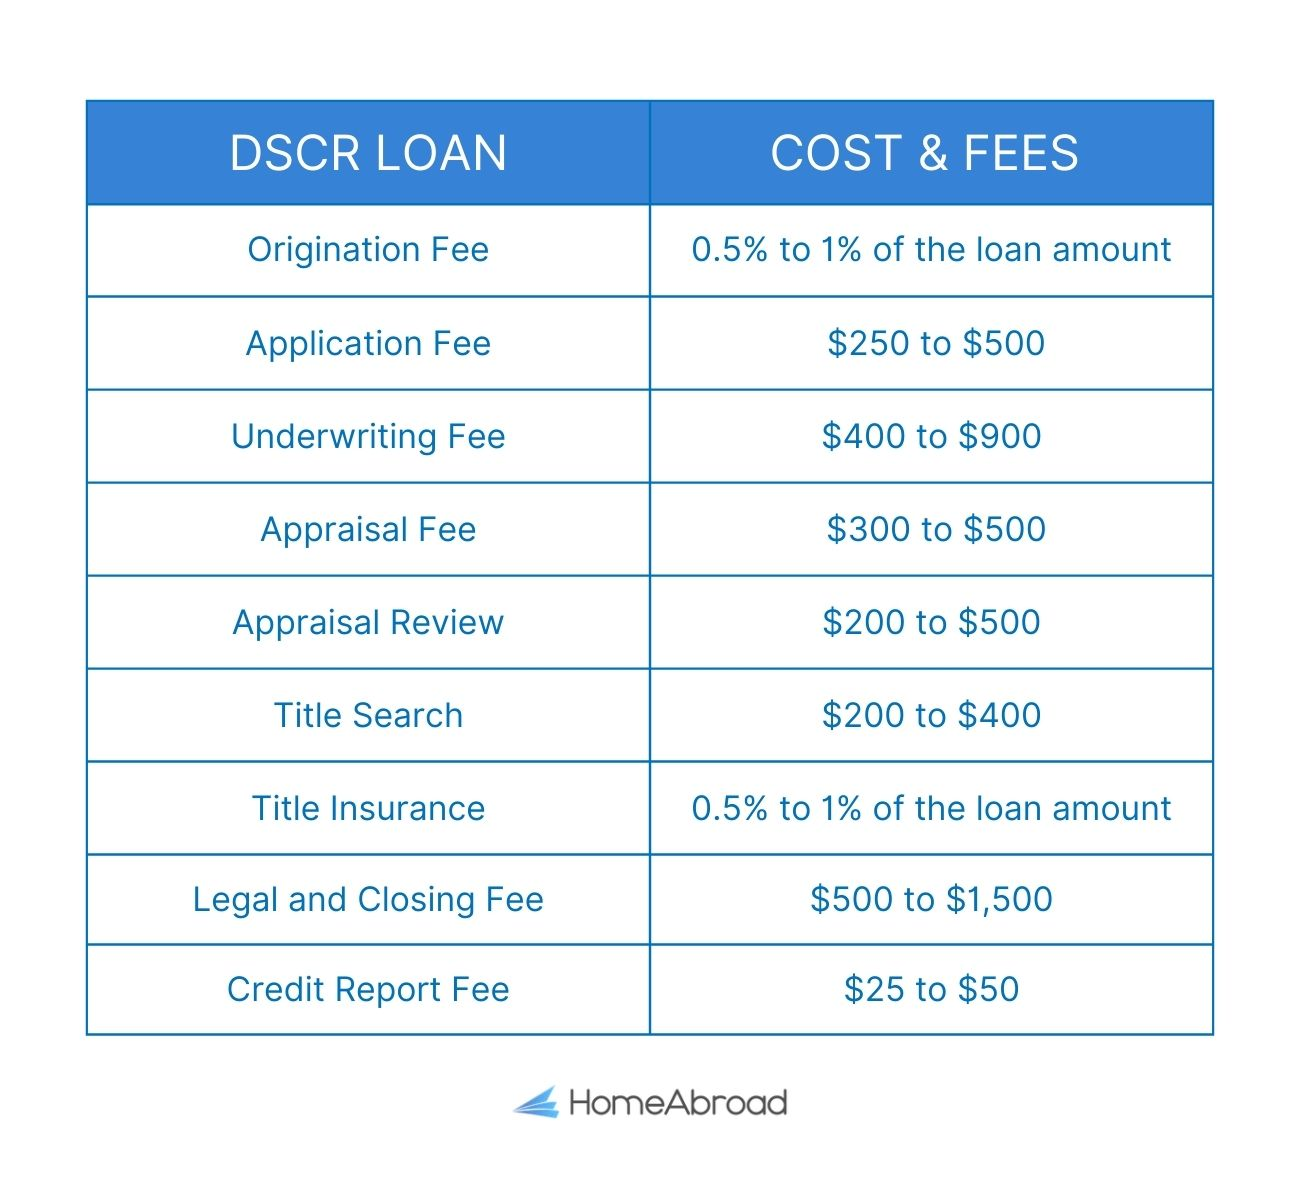 Cost and fees associated with DSCR loans